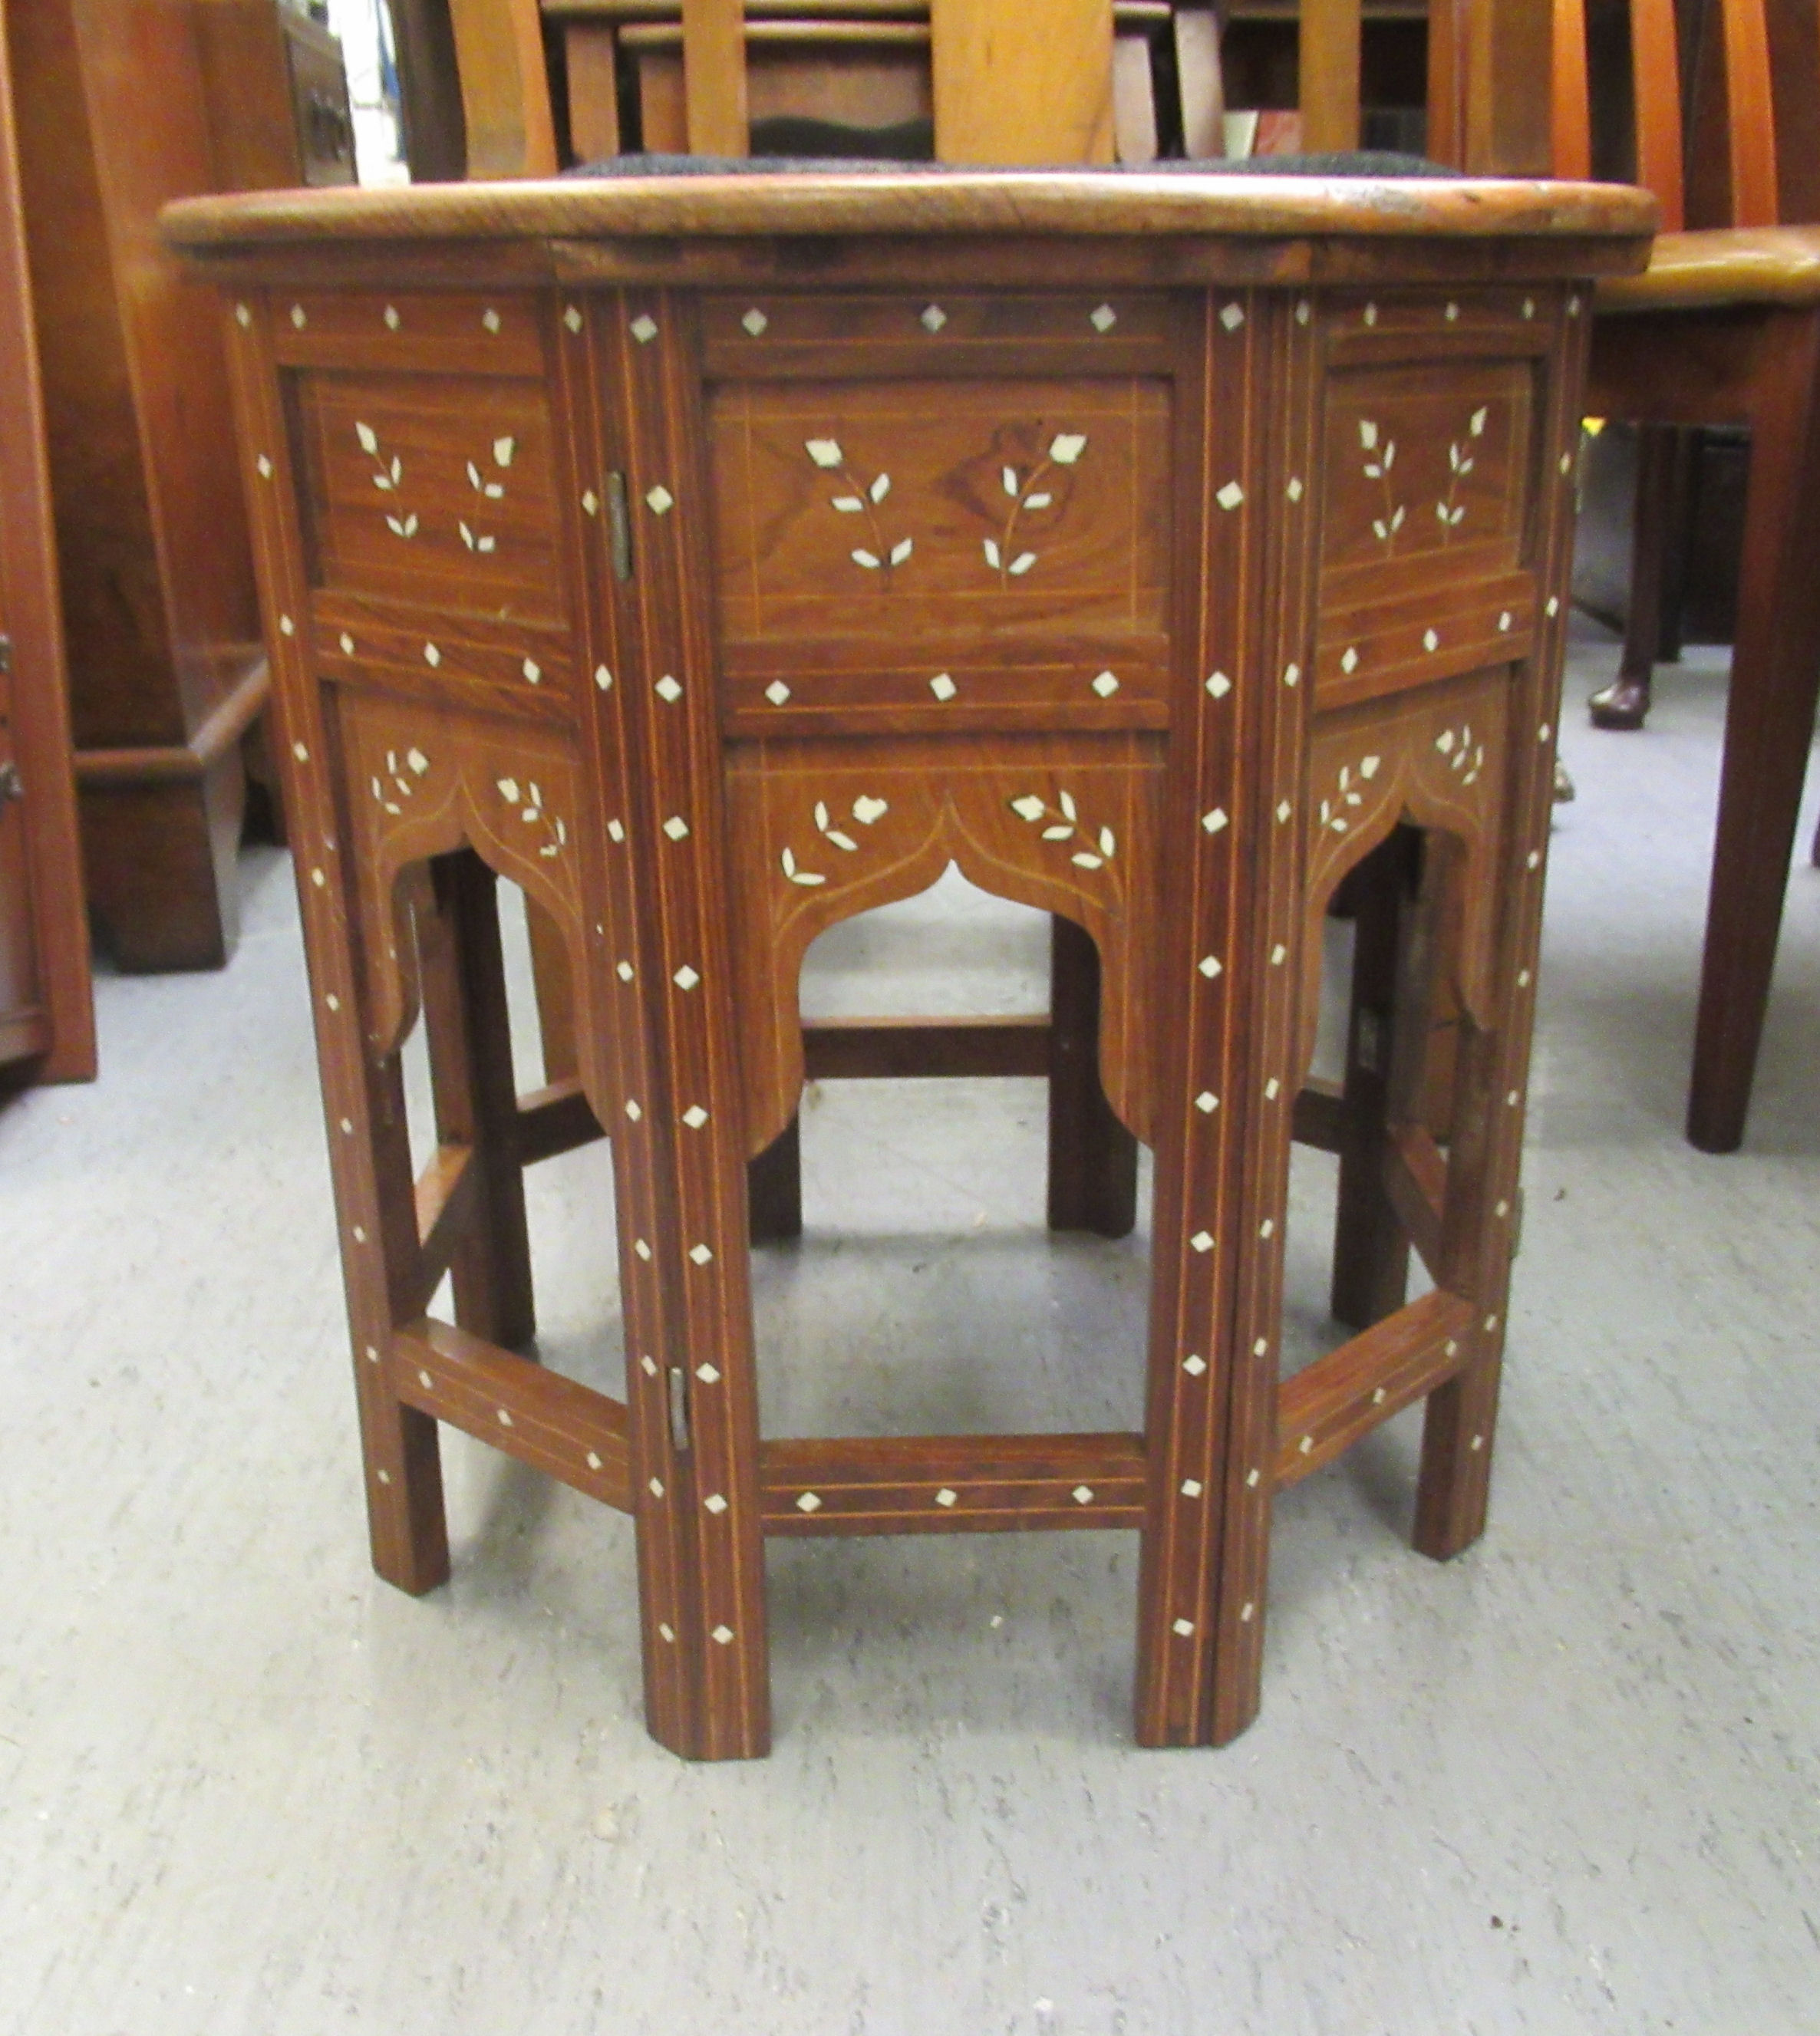 A 20thC Indian bone inlaid fruitwood occasional table, decorated with floral designs  18"h  18"dia